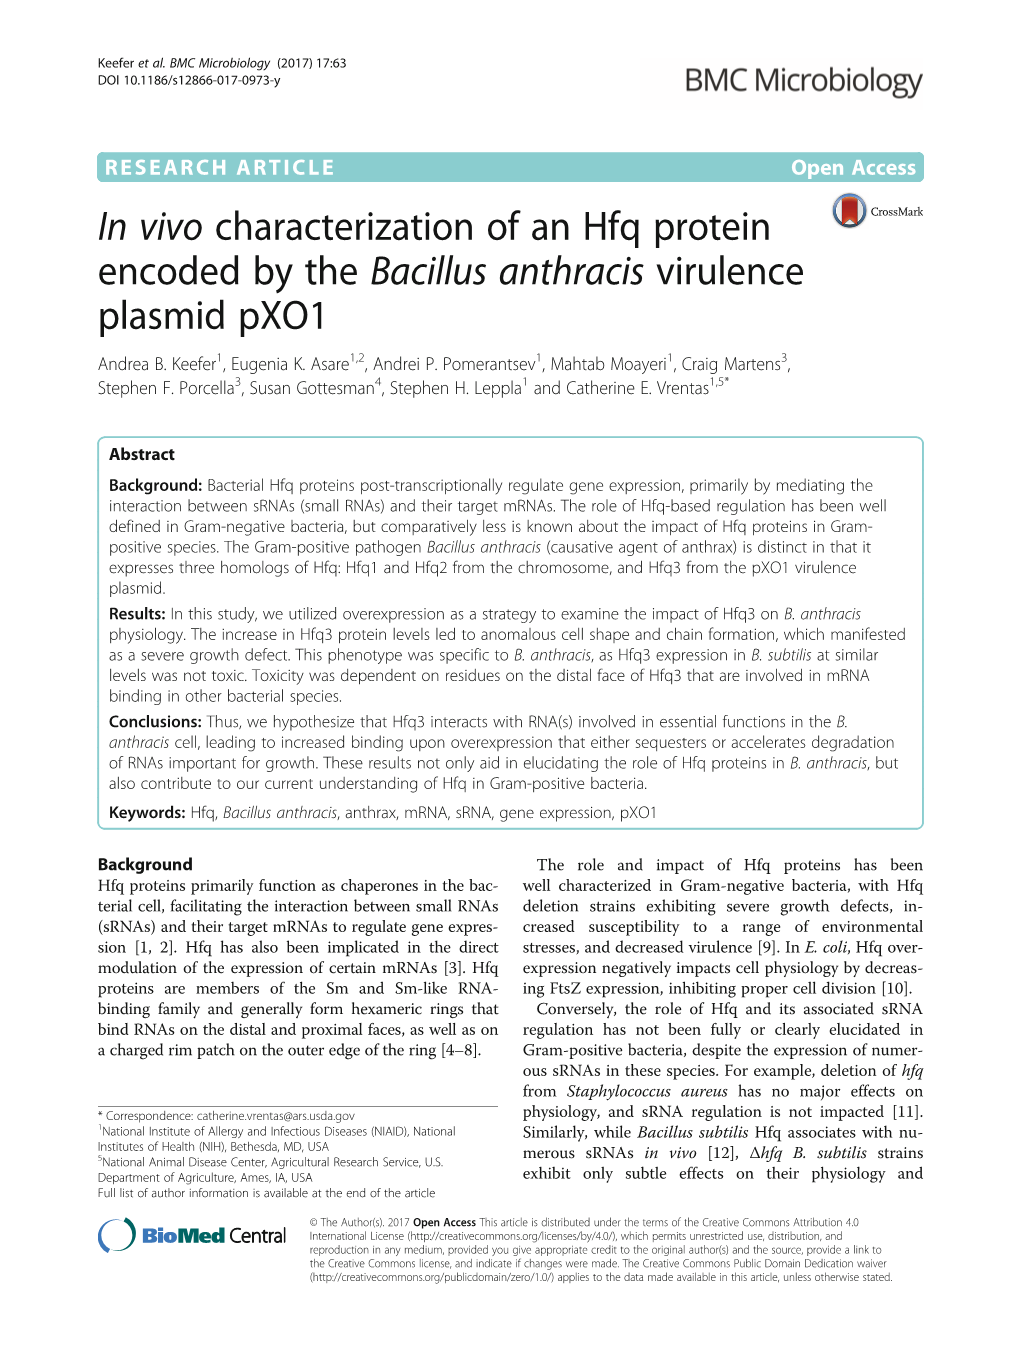 In Vivo Characterization of an Hfq Protein Encoded by the Bacillus Anthracis Virulence Plasmid Pxo1 Andrea B